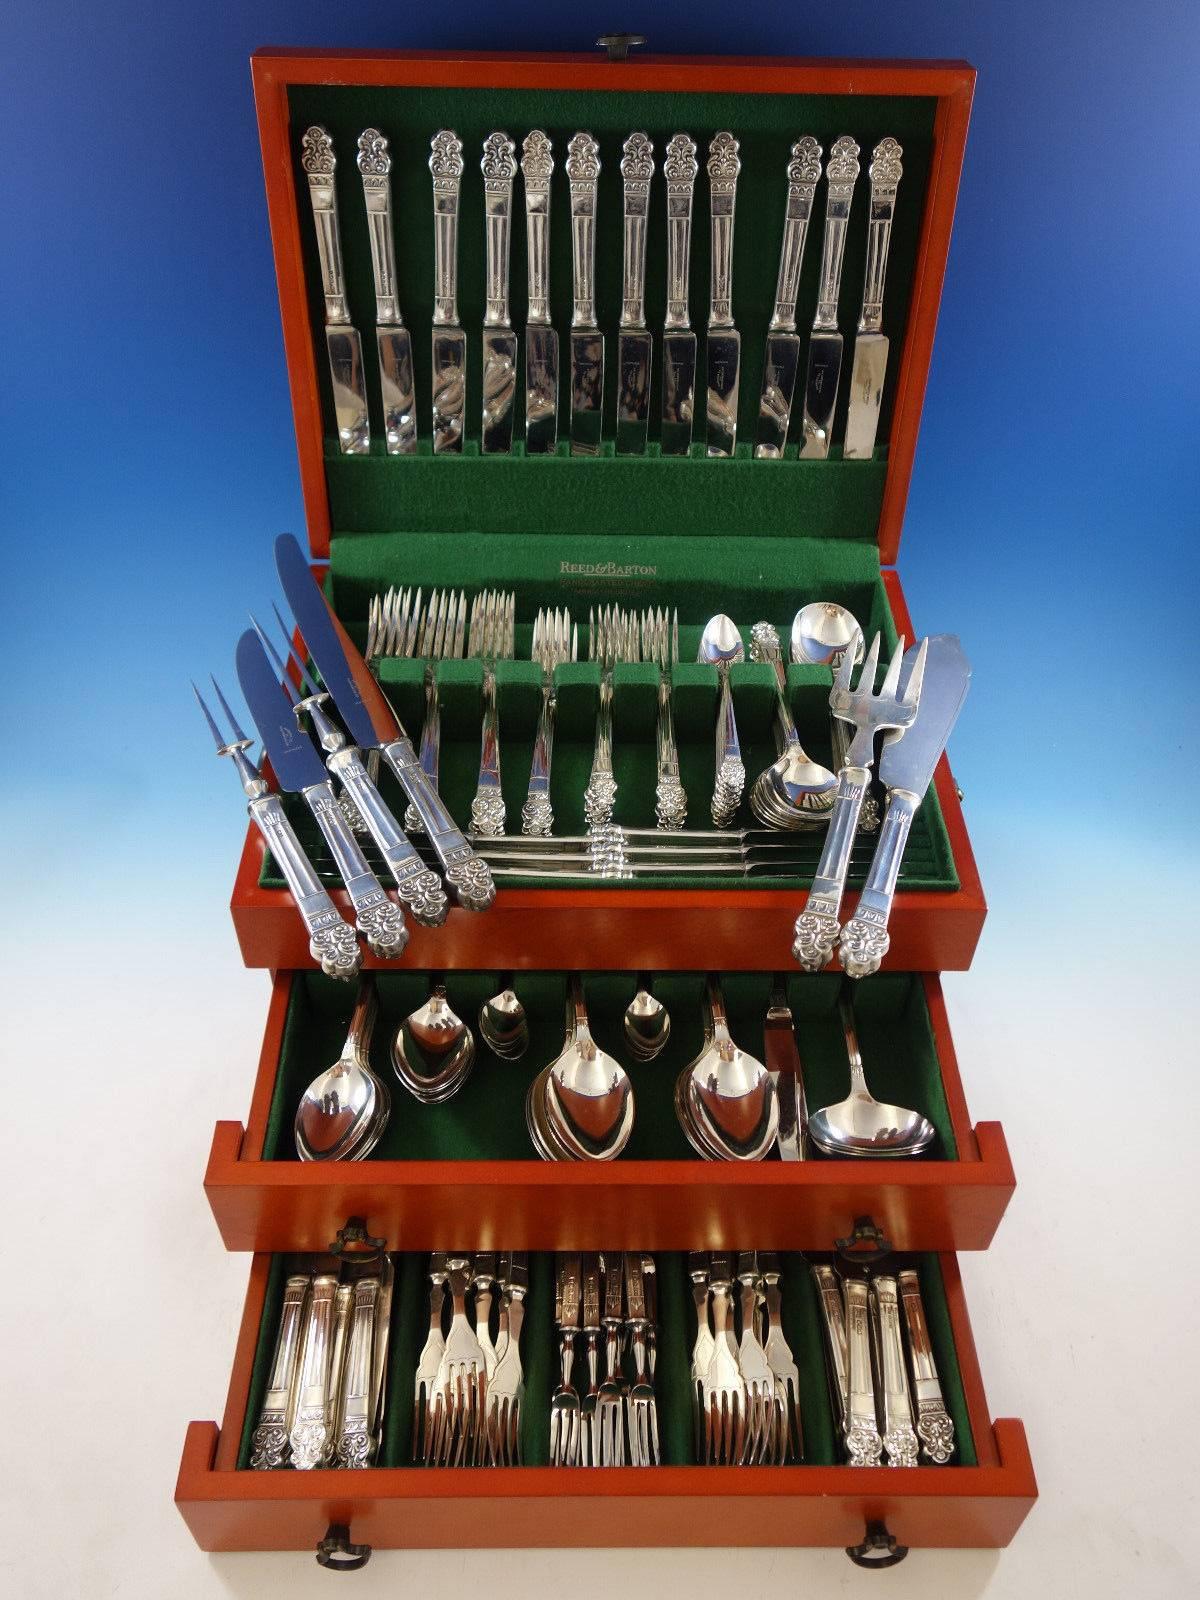 Elizabethan by Gee Holmes ltd. English (Harrods at Knightbridge) sterling silver flatware set, 164 pieces. This set includes: 

12 dinner size knives, 9 3/4